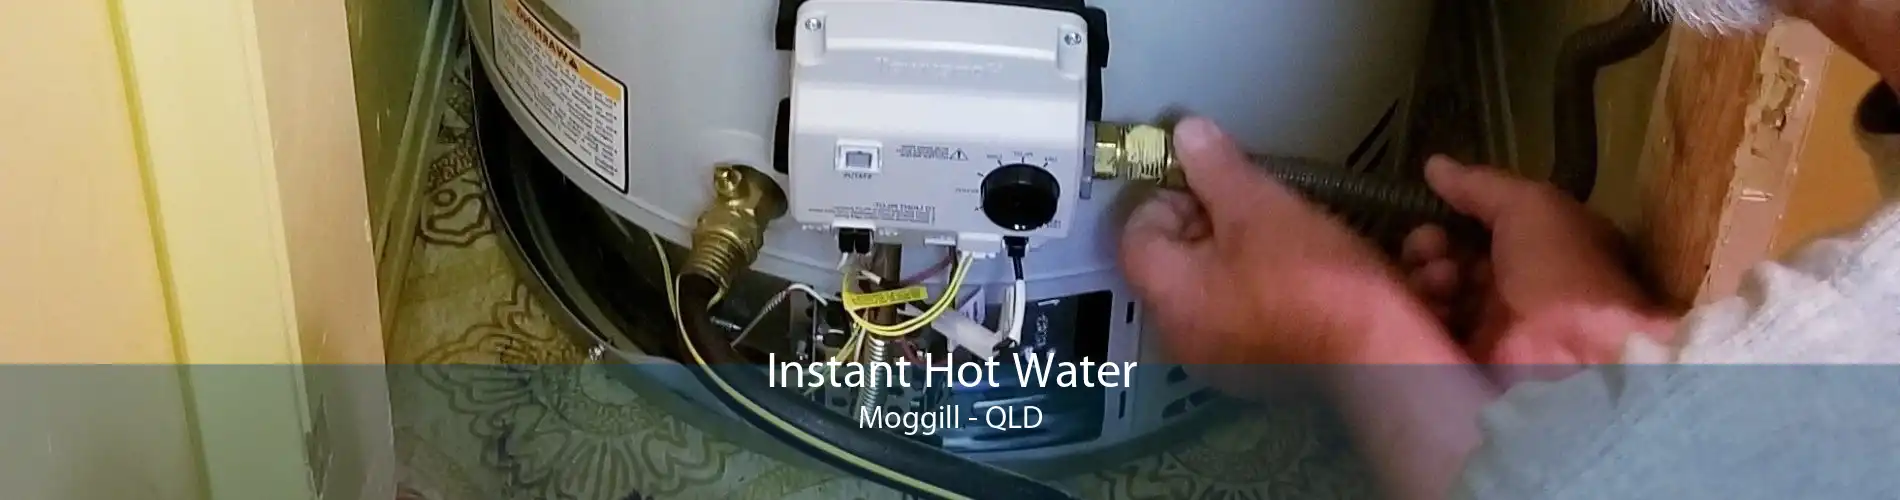 Instant Hot Water Moggill - QLD